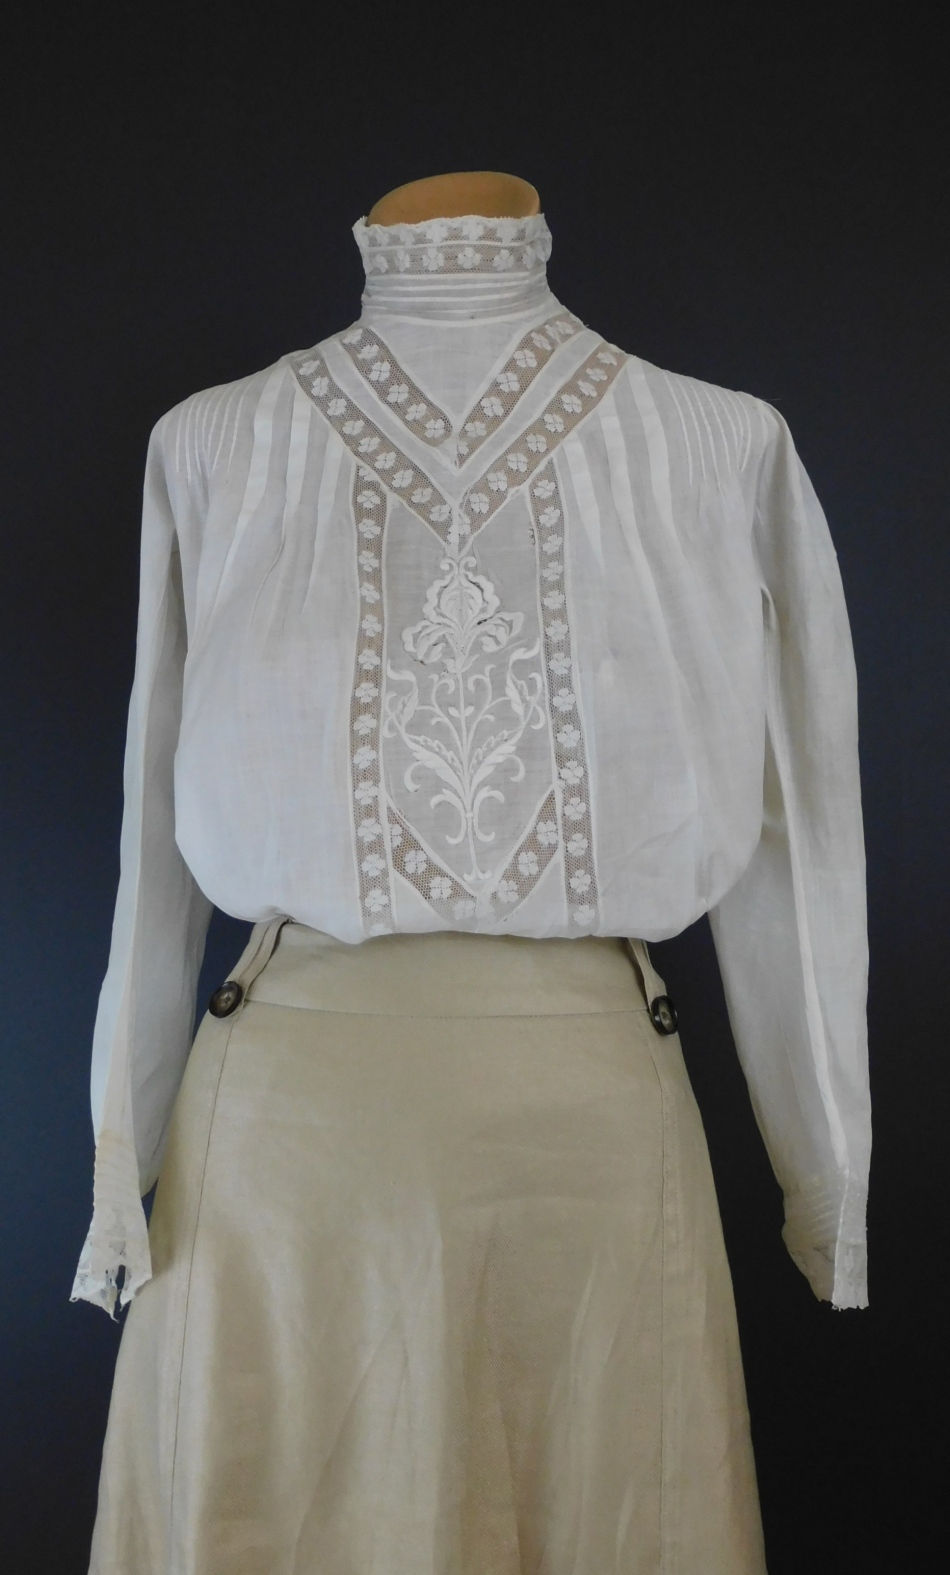 Antique Edwardian Lace Blouse with High Neck Collar, 1900s White Cotton, fits 32 inch bust, some issues